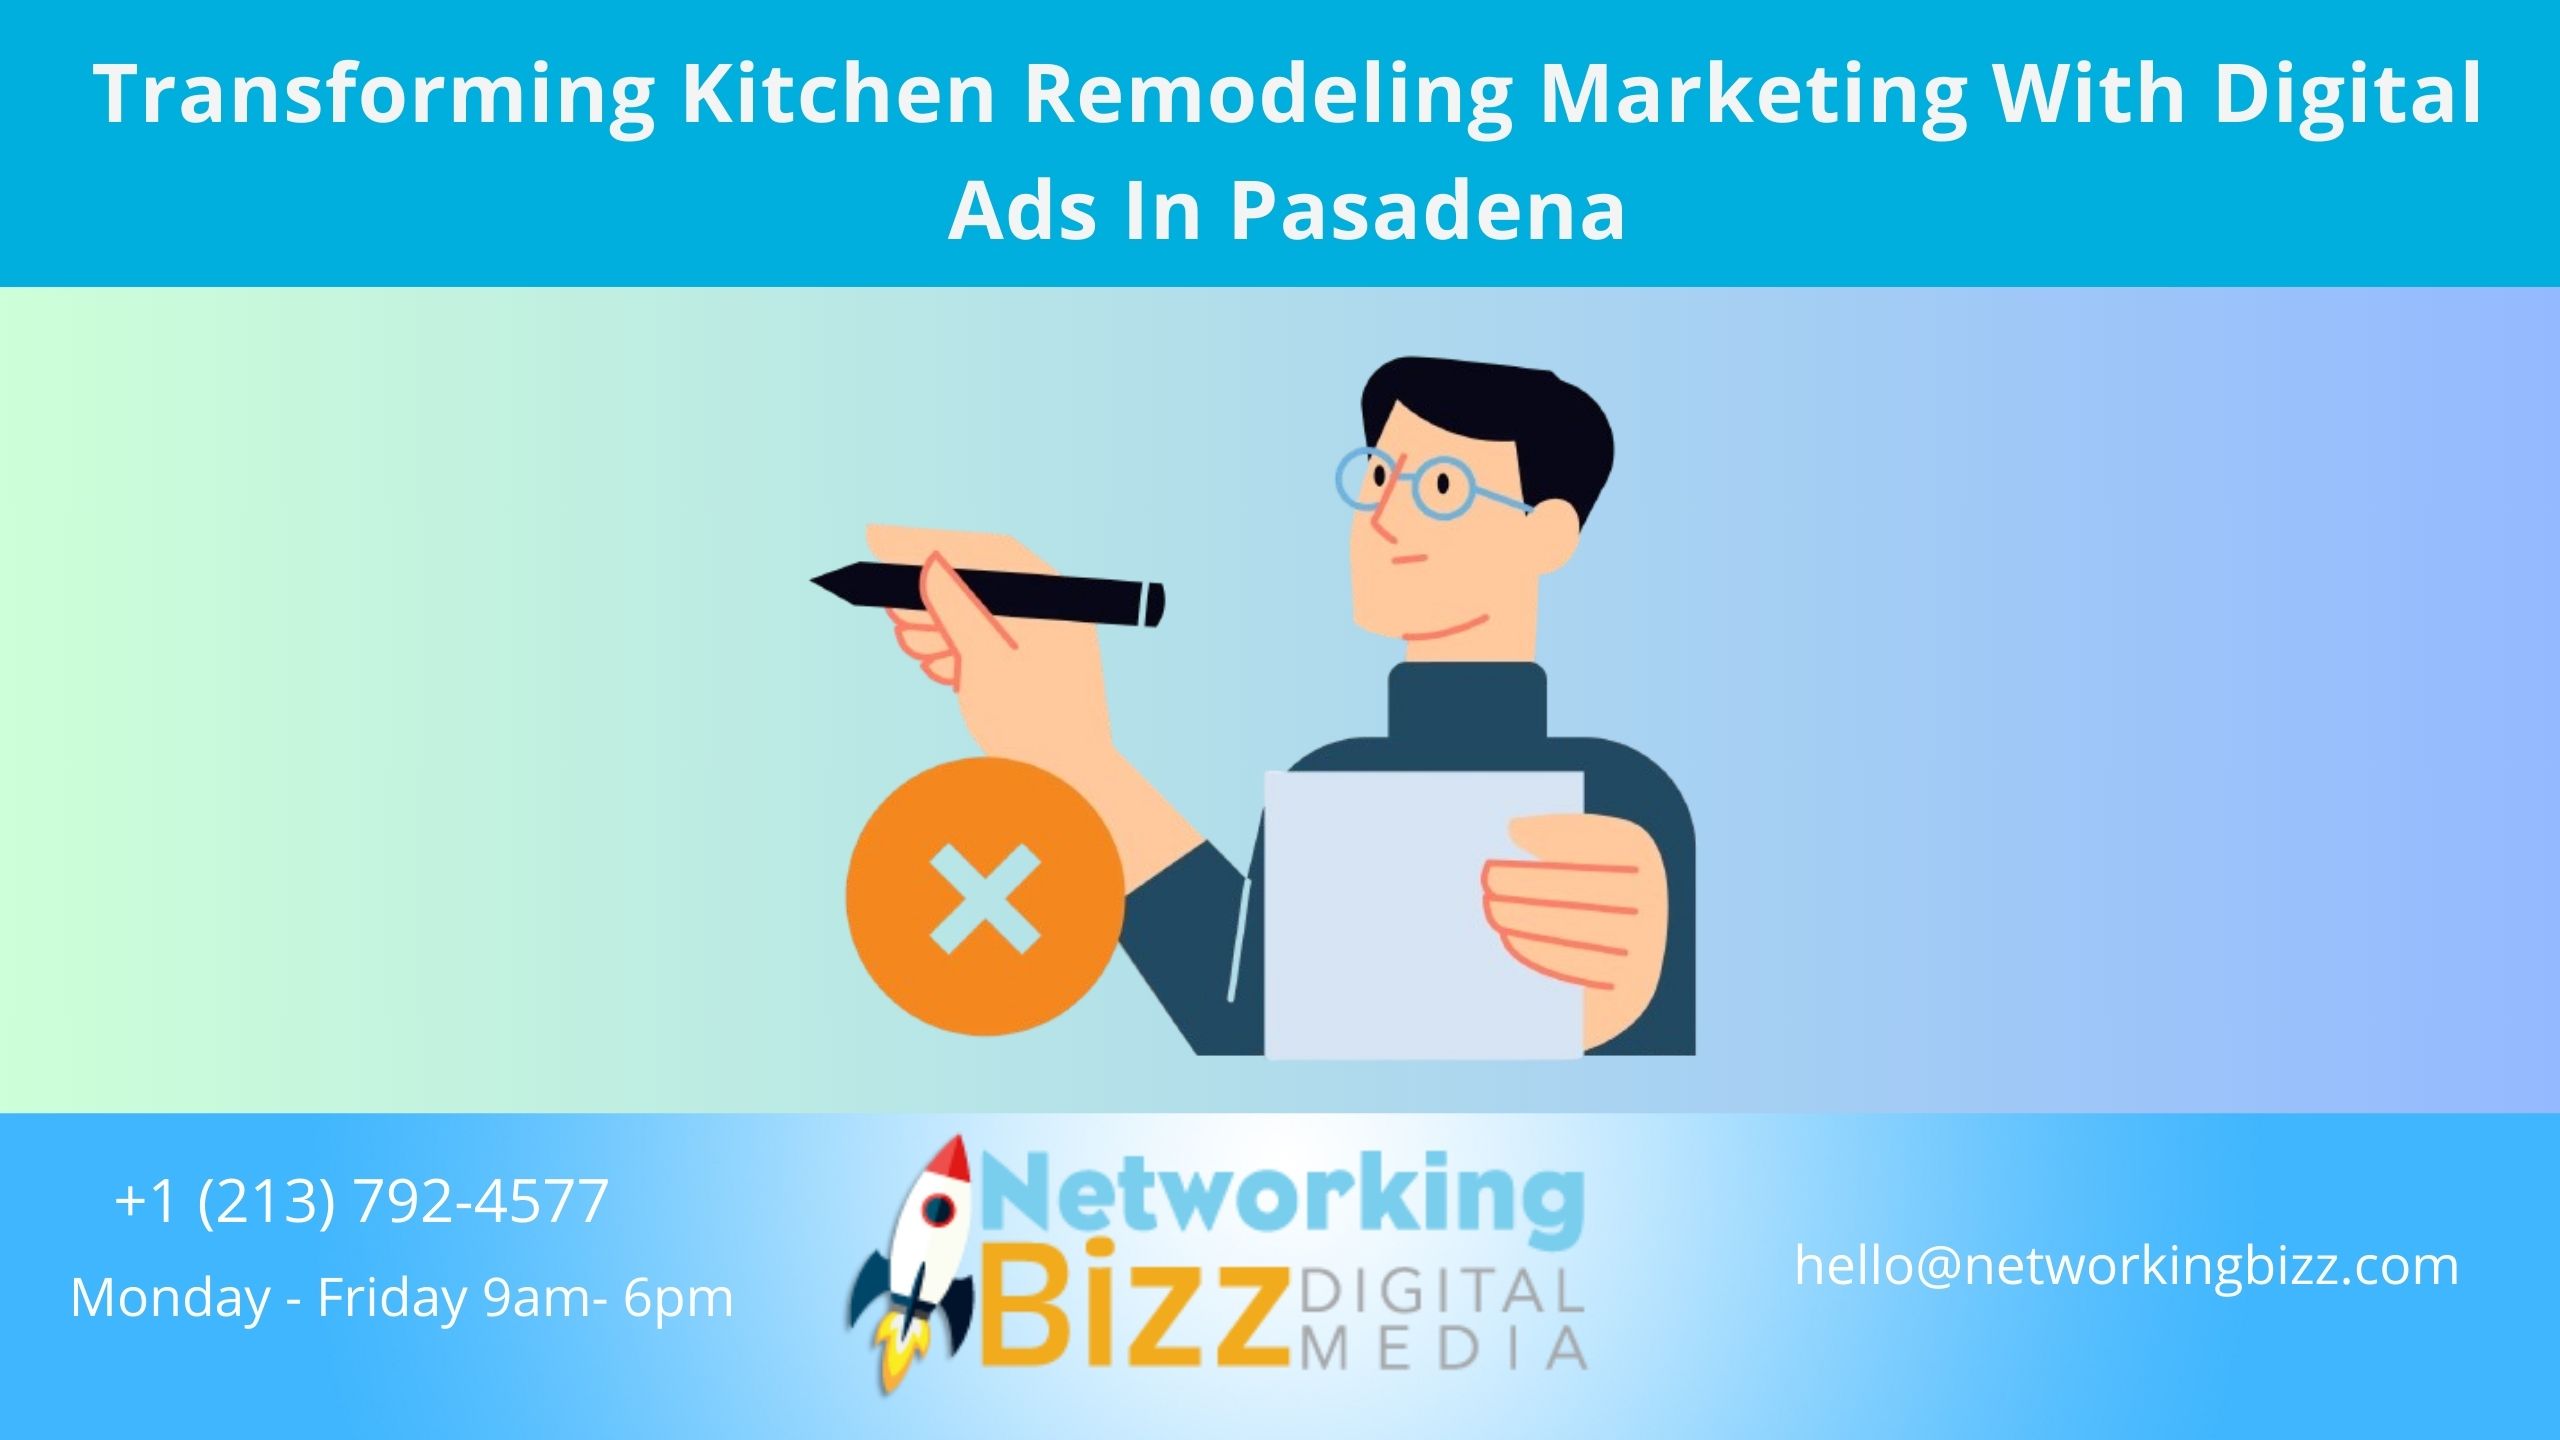 Transforming Kitchen Remodeling Marketing With Digital Ads In Pasadena